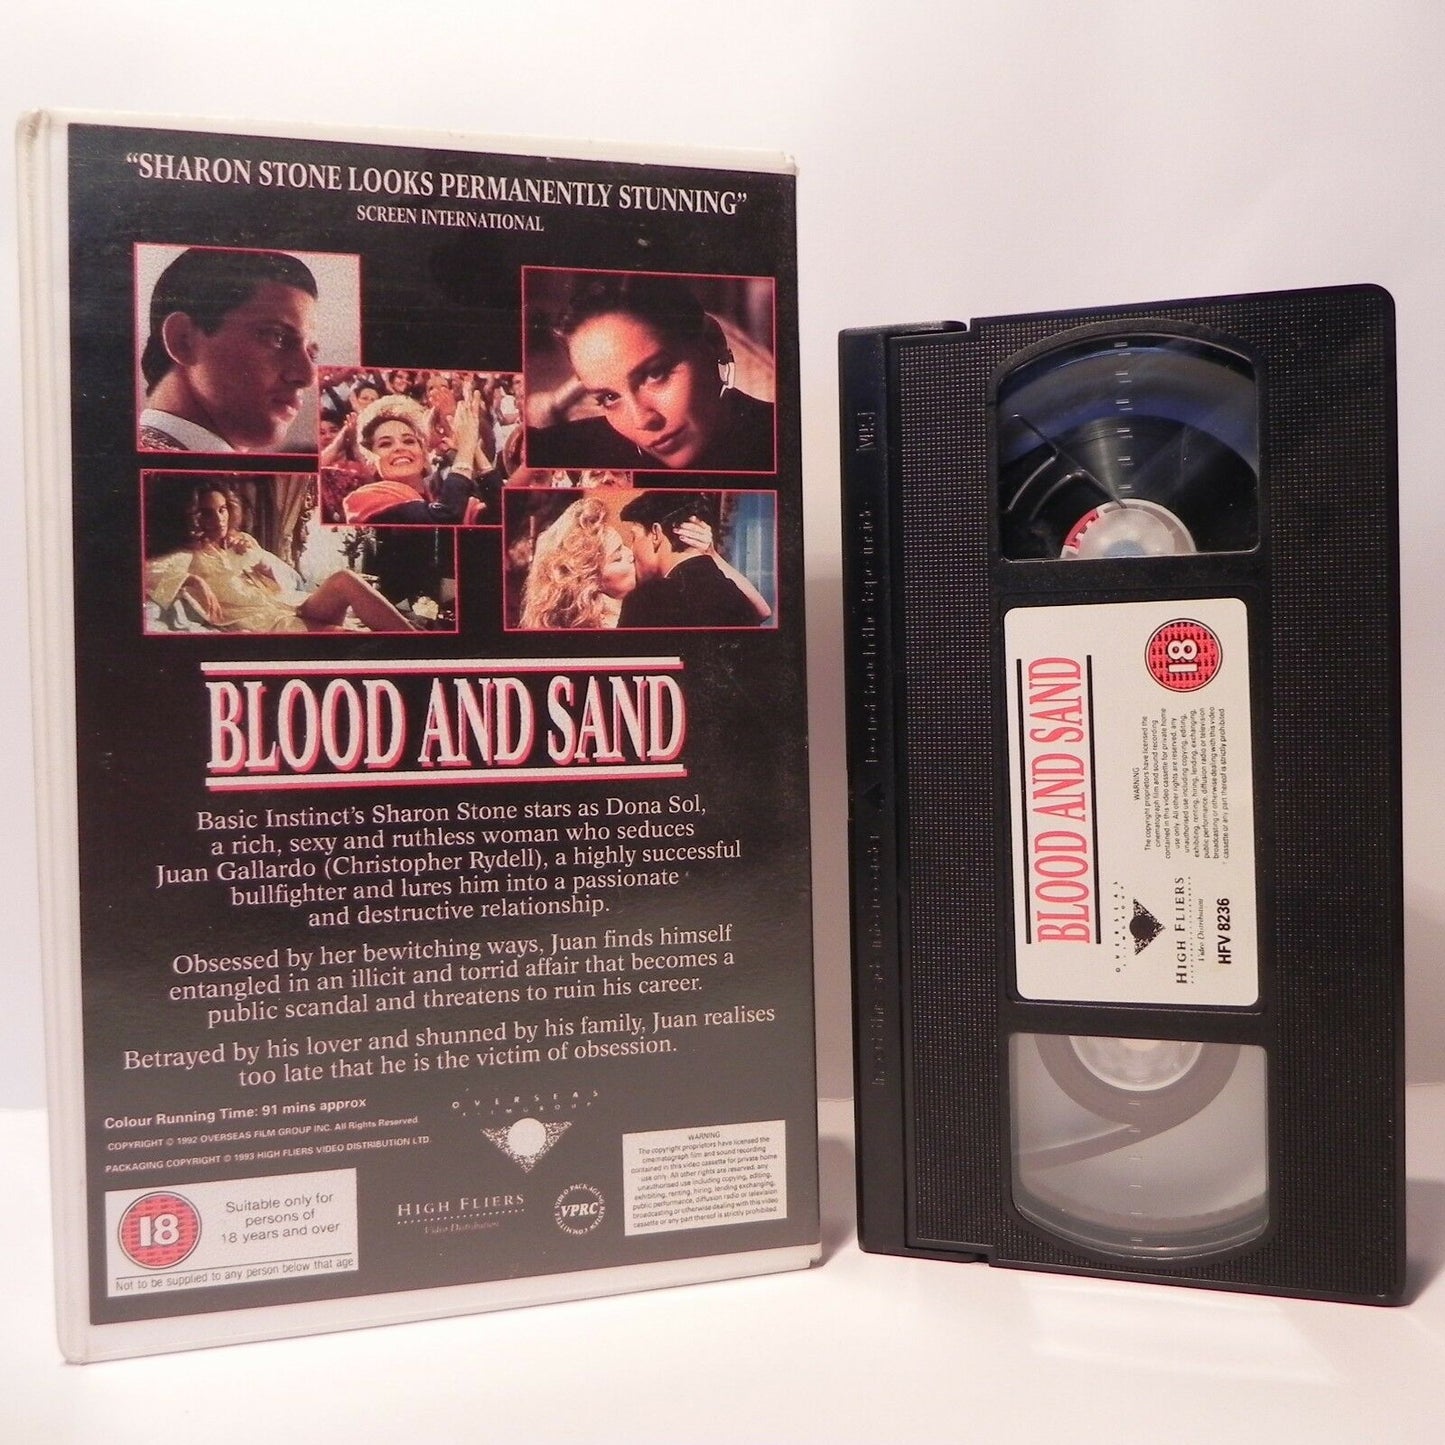 Blood And Sand - Large Box - High Fliers - Thriller - Sharon Stone - Pal VHS-